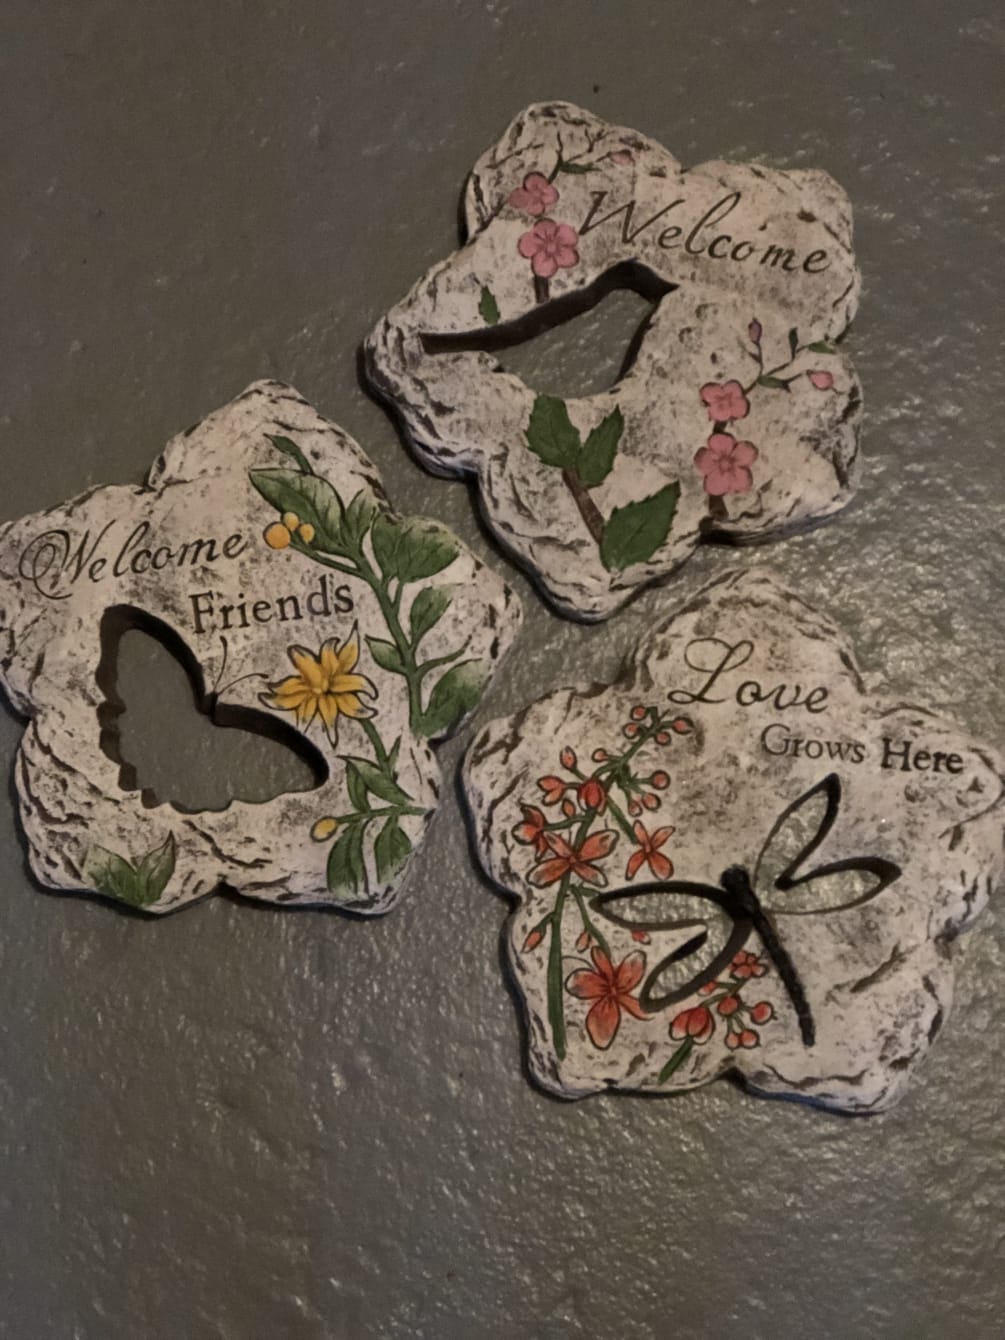 Three Unique Garden Stones with Cut-outs of our favorite Backyard&#039;s Nature sighting.
Made